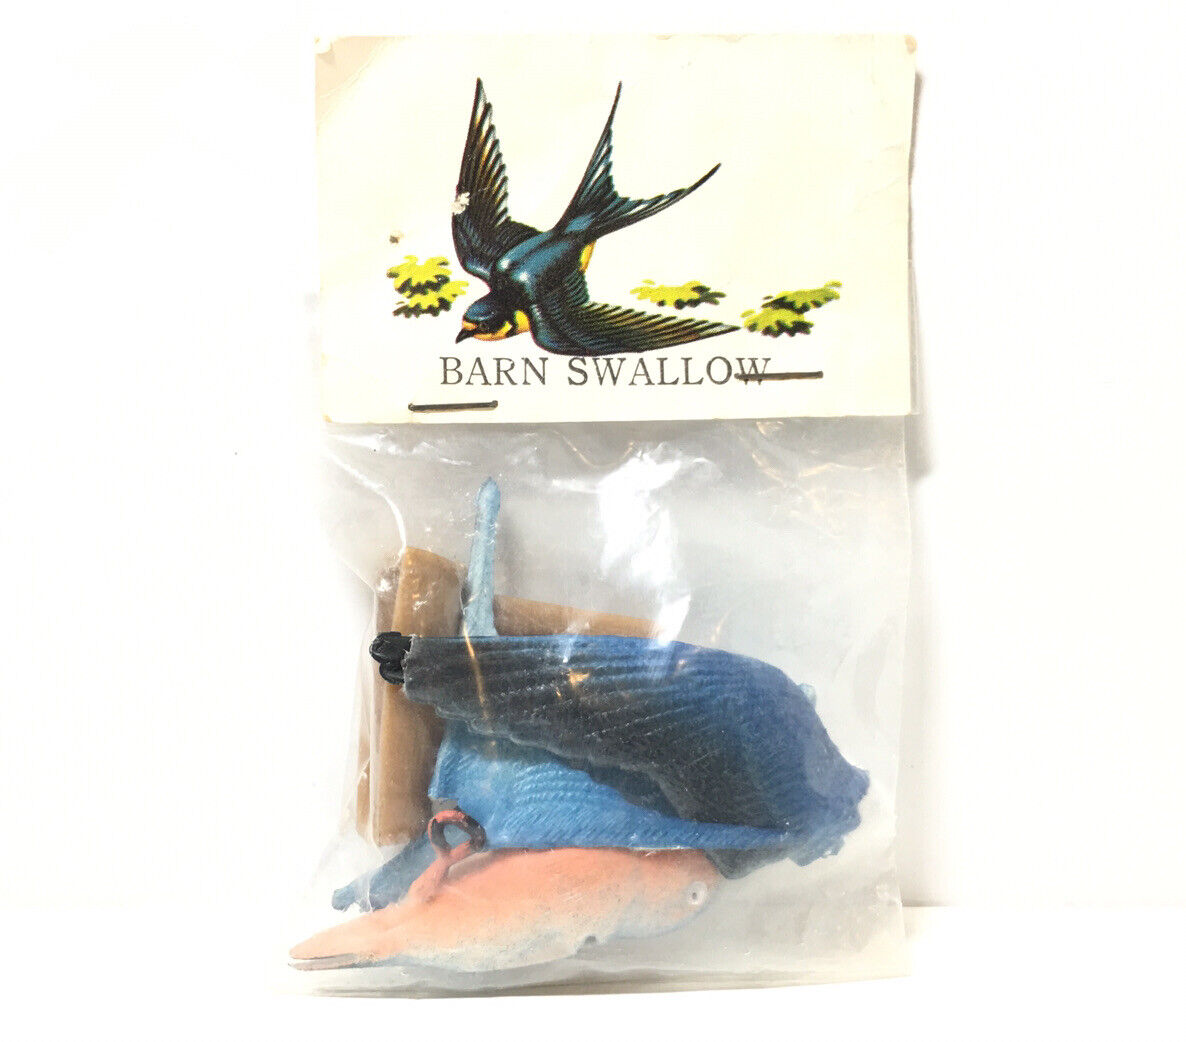 Japan Exclusive Barn Swallow Prothonotary Warbler Bird Figure